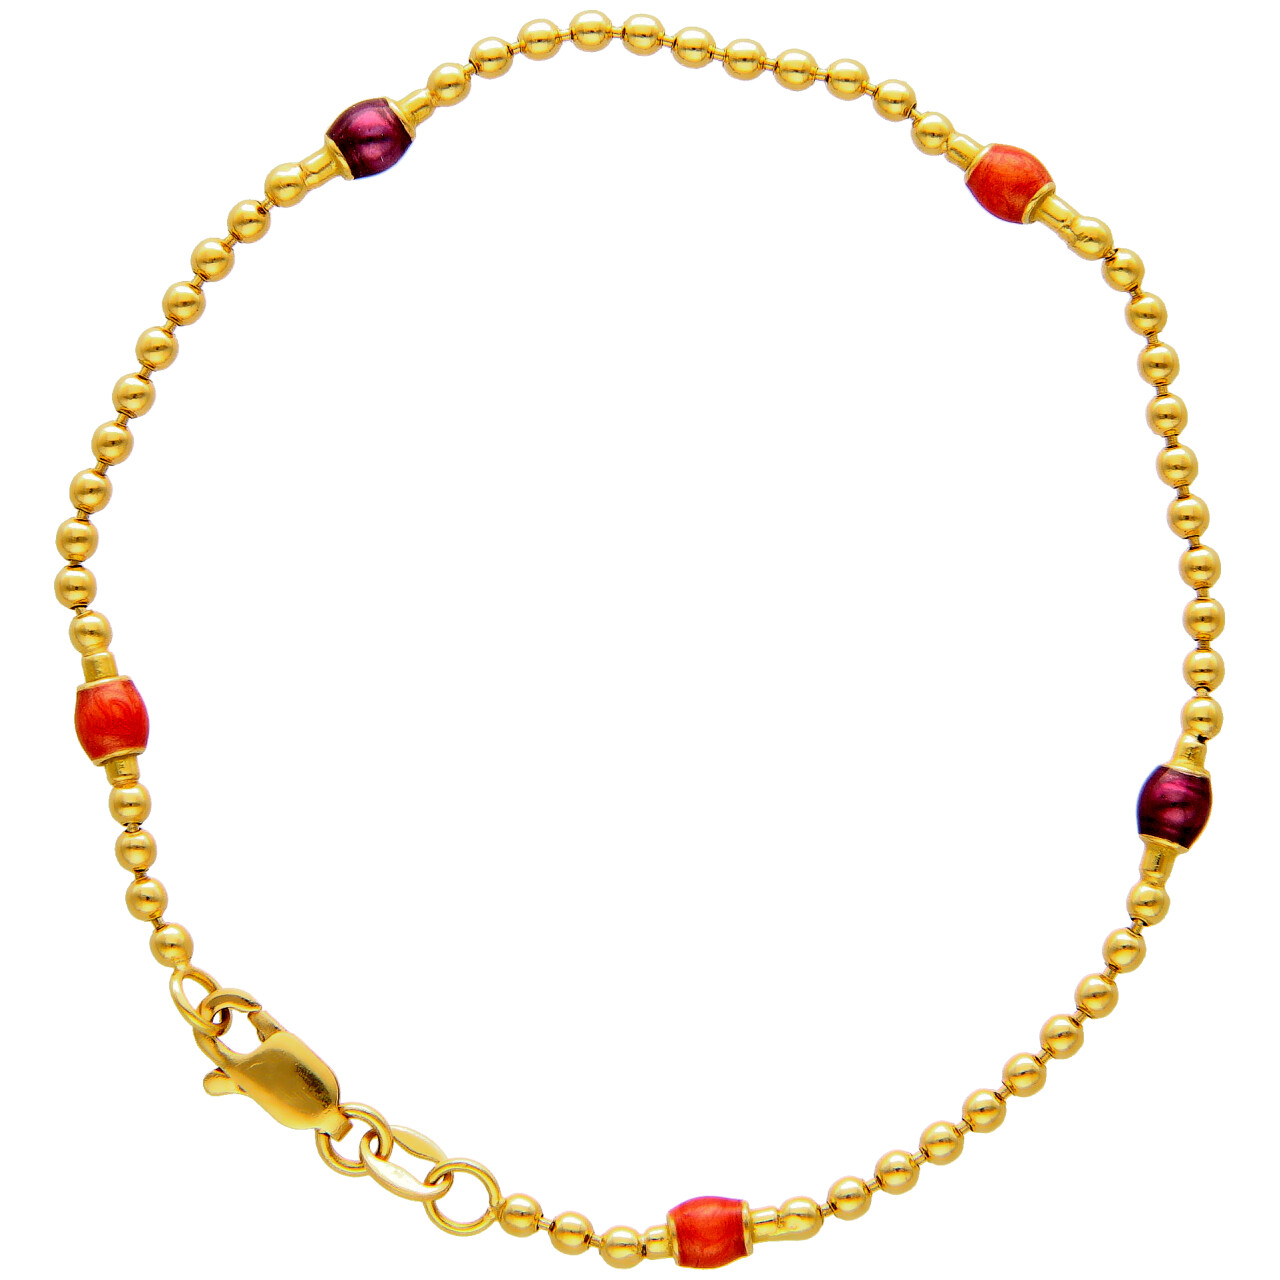 Bracelet with yellow gold spheres and enamel